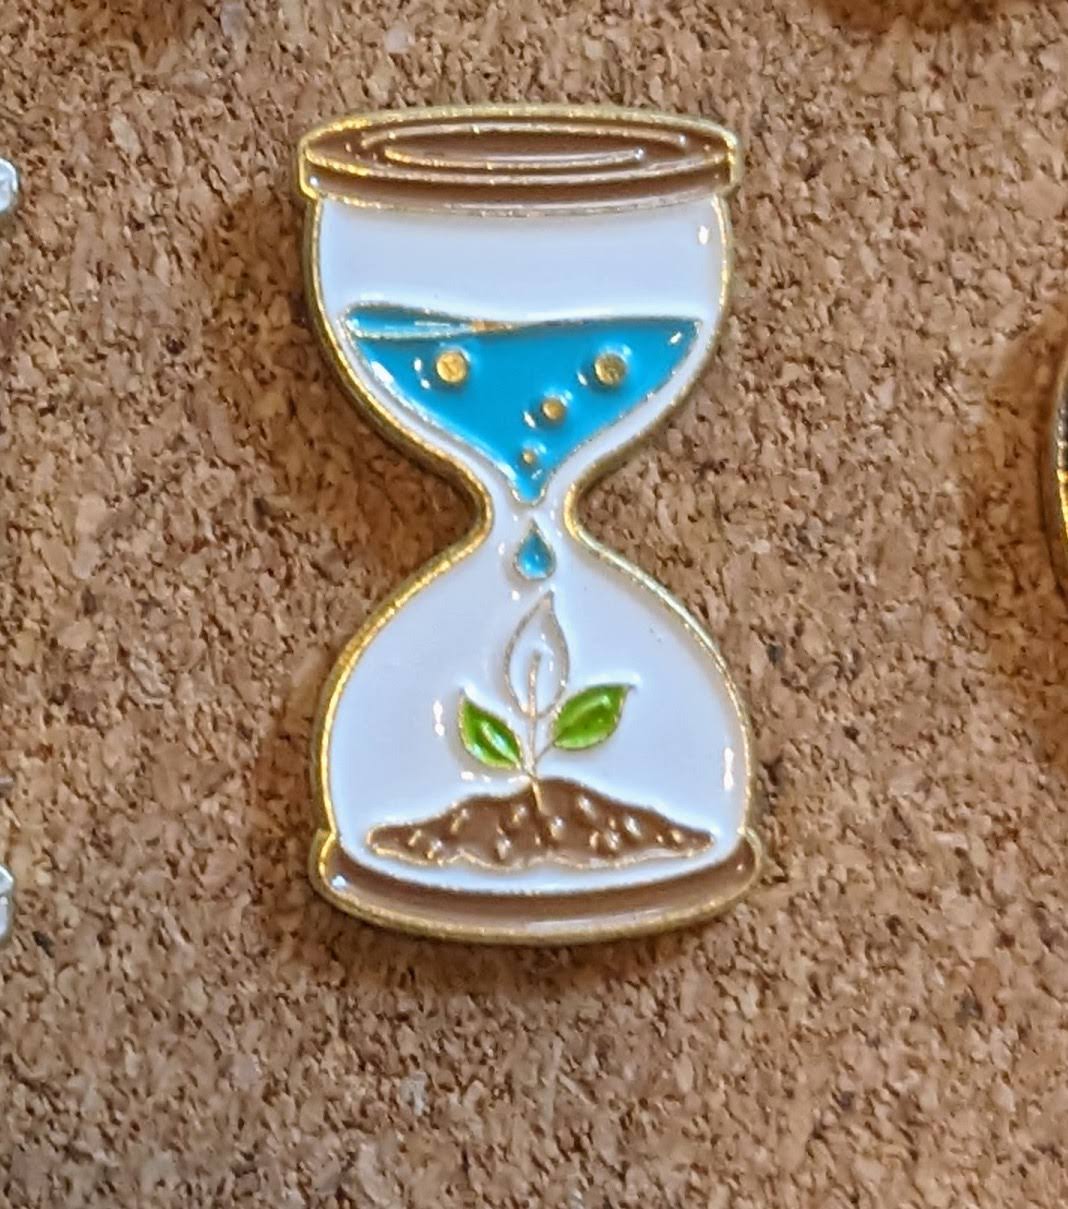 Watering Plant Hourglass Pin